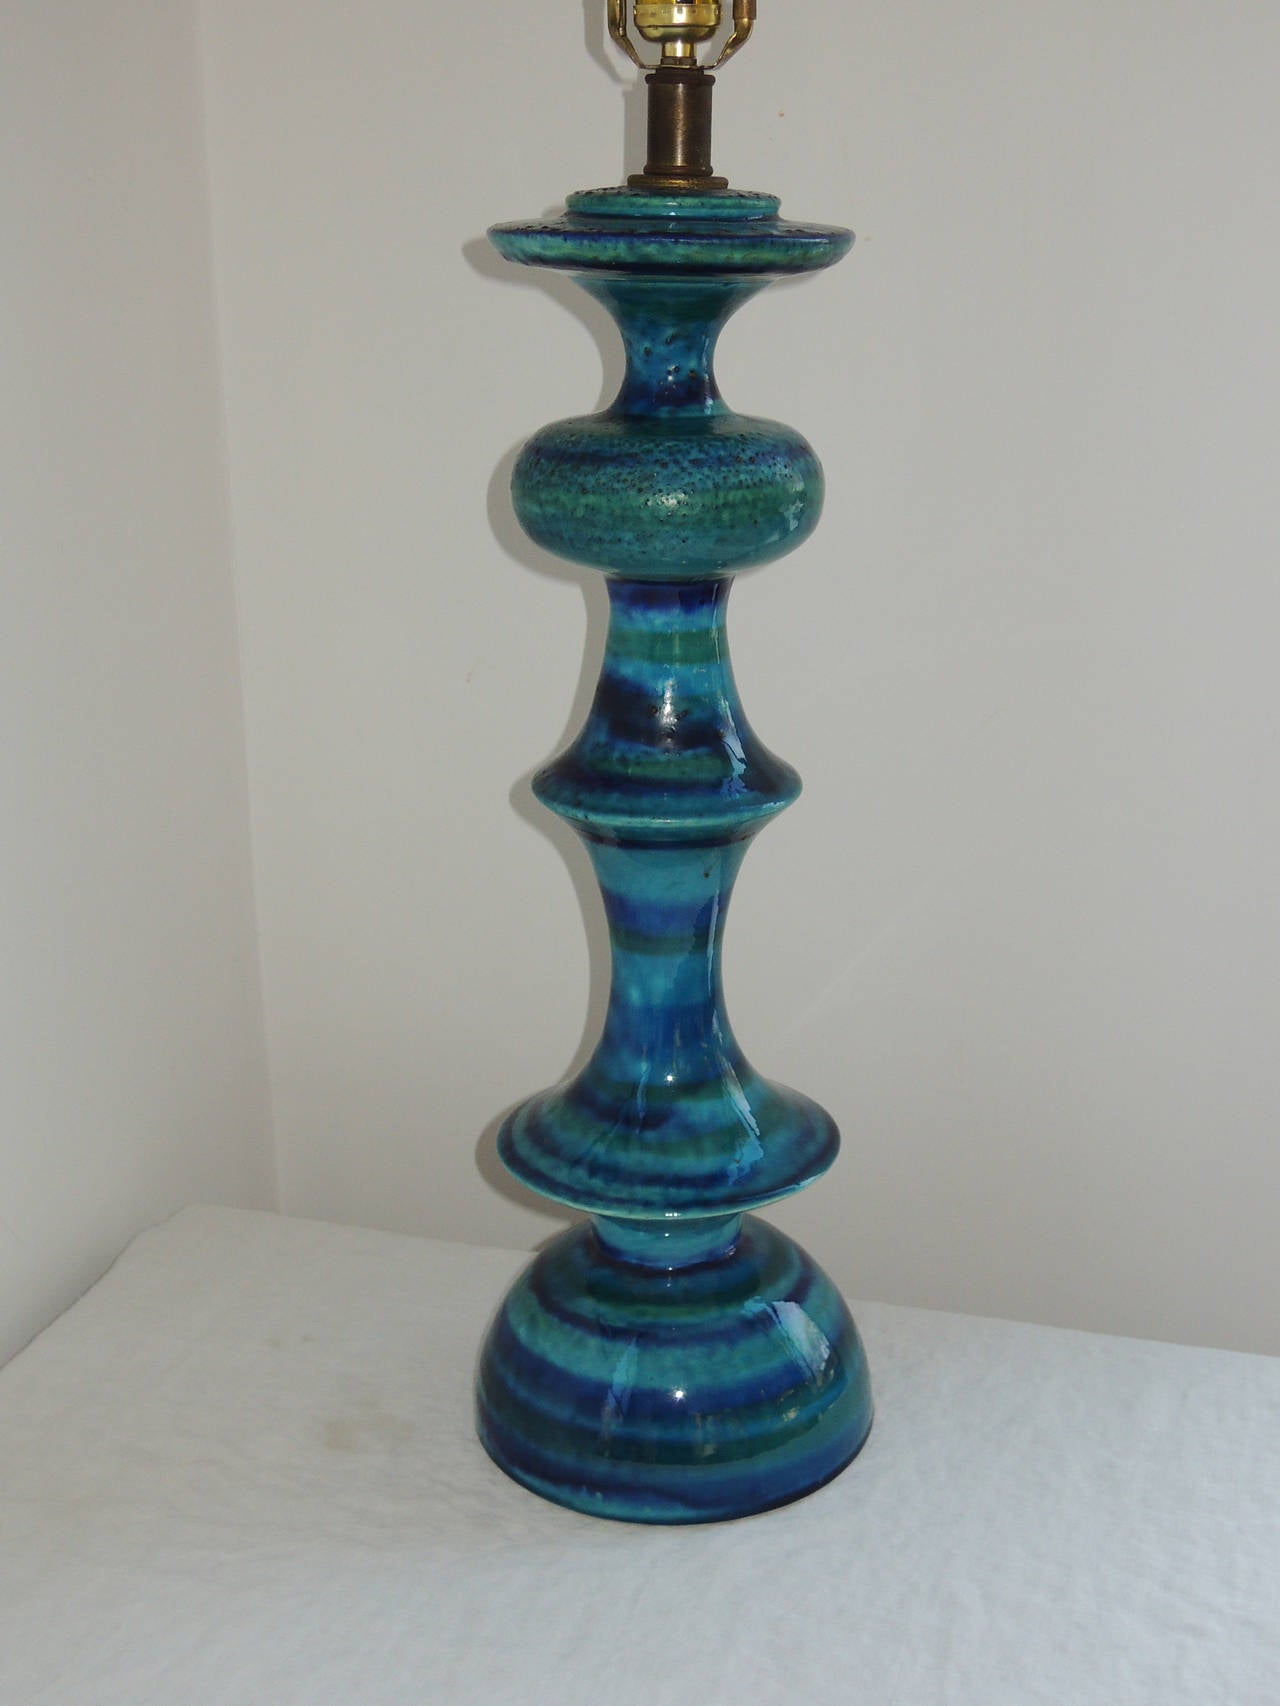 Classic turquoise blue ceramic of Bitossi. Tall, elegant form.
Rewired. 23.5 high to socket.